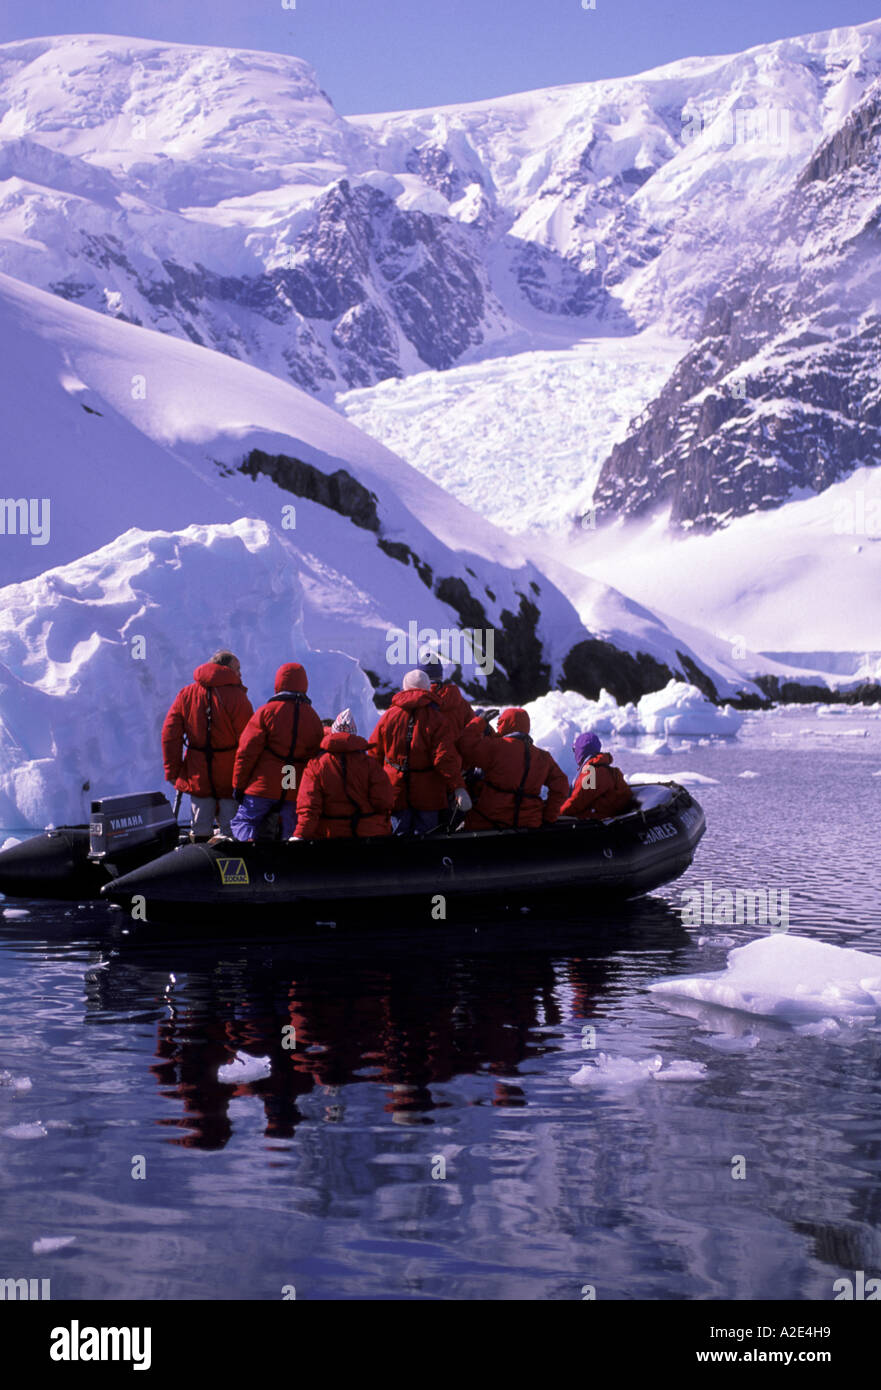 Antarktis. Expedition durch icescapes Stockfoto